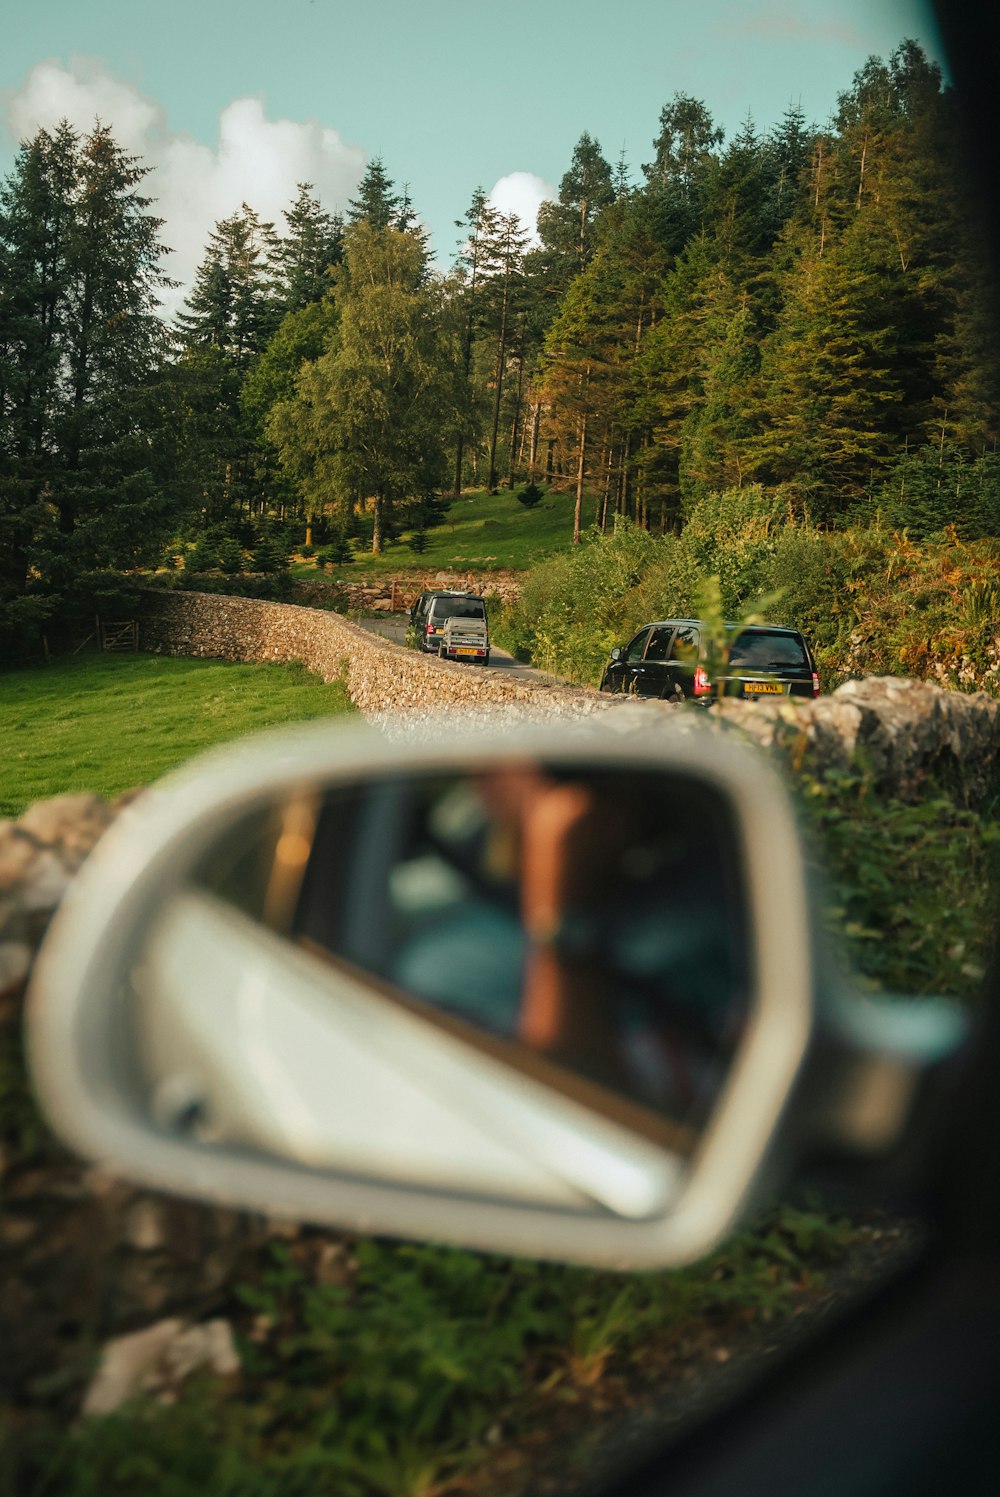 a car's side view mirror reflecting a road in the rear view mirror